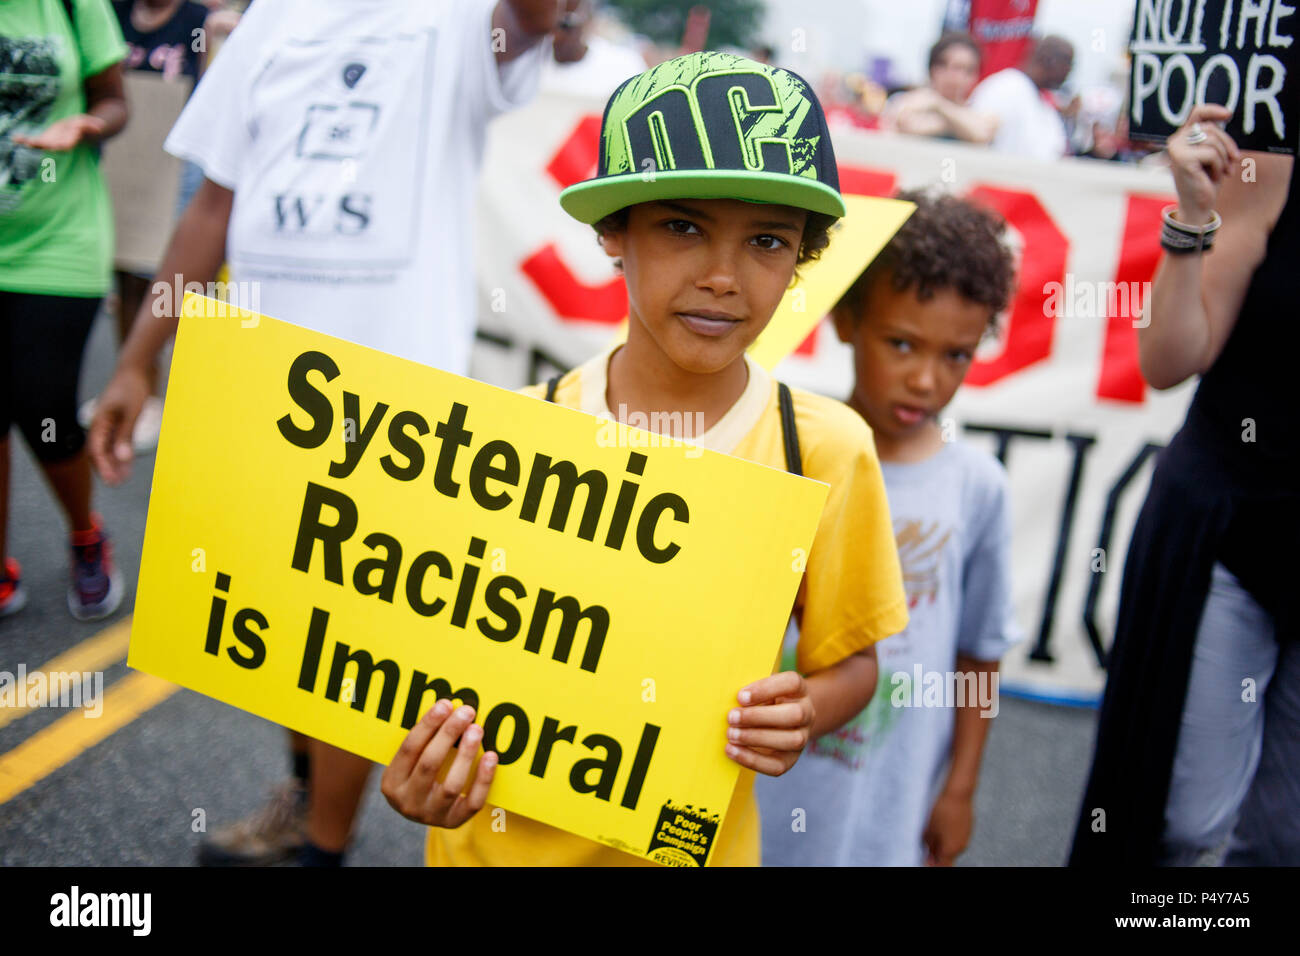 Washington, USA. 23rd June, 2018. Protestors walk toward the U.S. Capitol as part of the Stand Aganst Poverty March. The event is organized by the Poor People's Campaign, led by Rev. William Barber and Rev. Liz Theoharis and reviving a mission led by Dr. Martin Luther King, Jr. Credit: Michael Candelori/Pacific Press/Alamy Live News Stock Photo